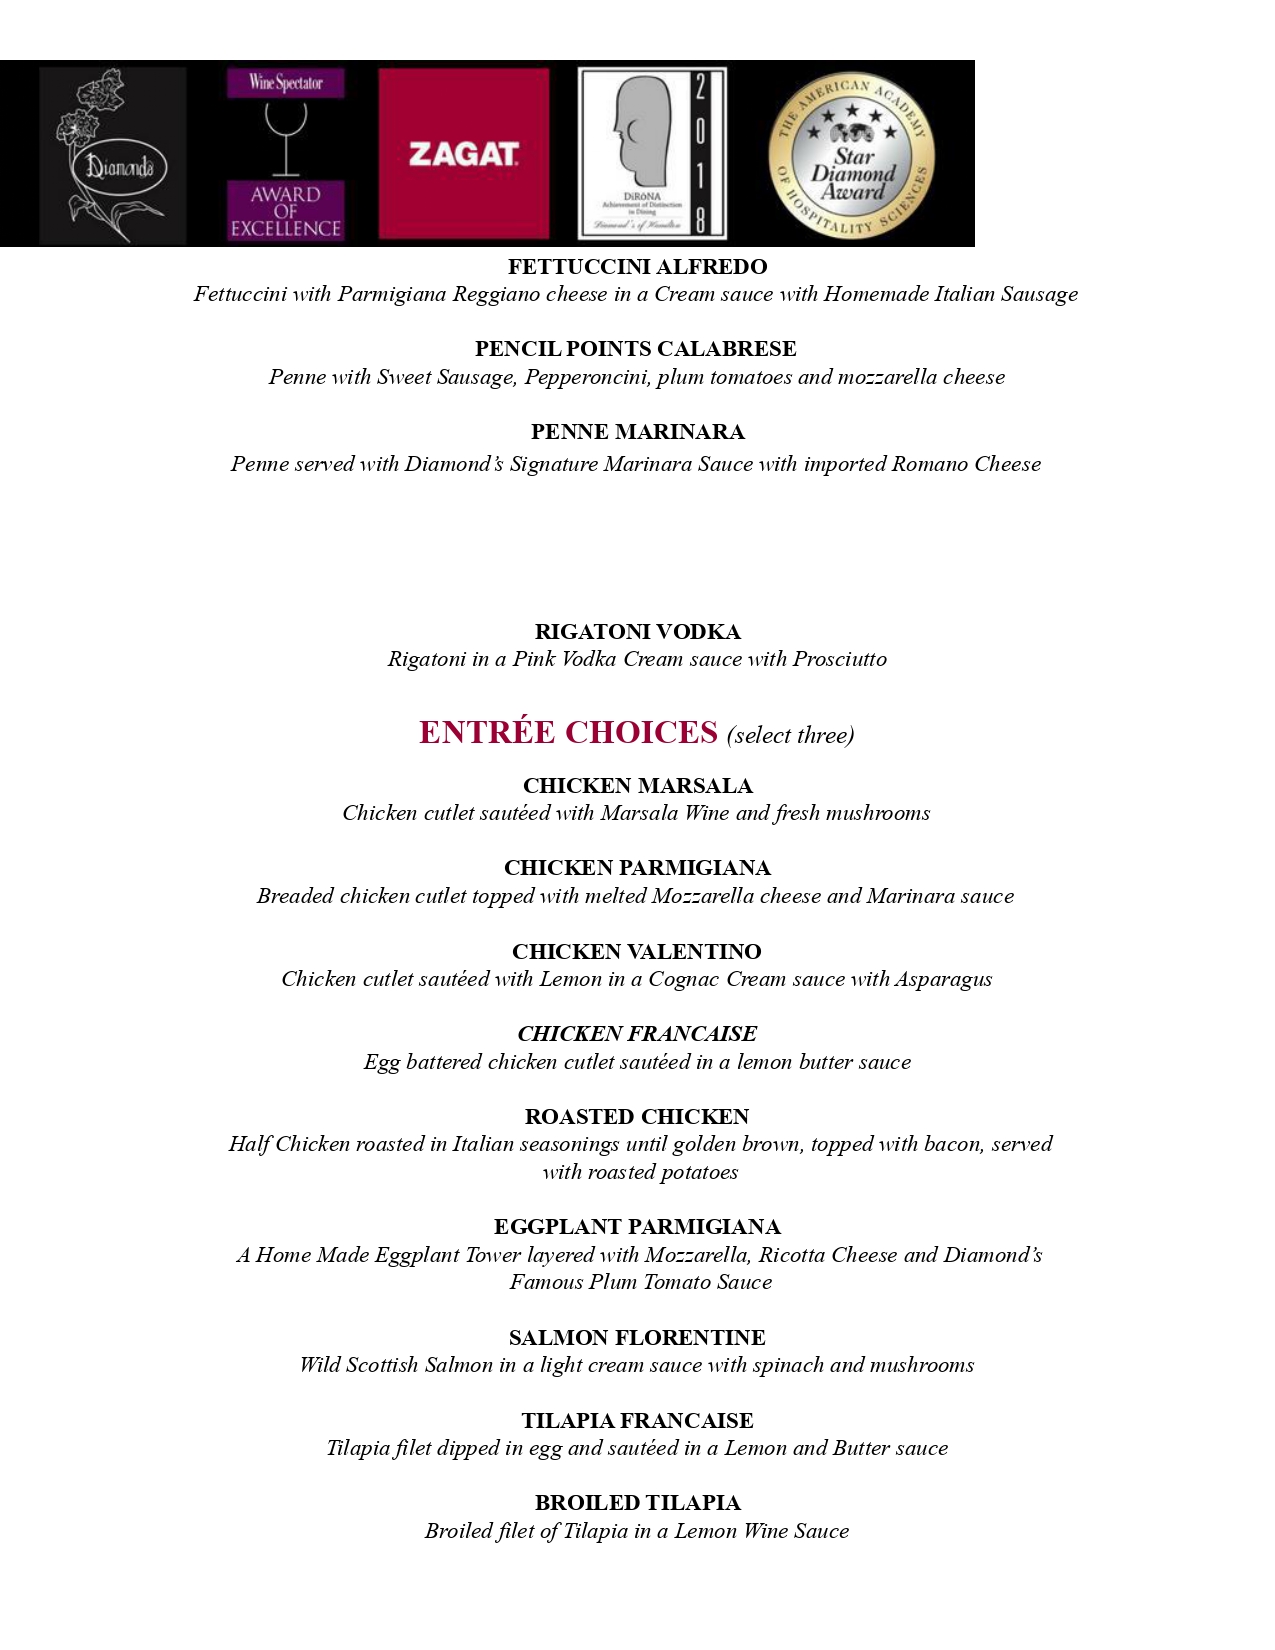 Menu of an upscale restaurant featuring italian dishes including pasta, chicken, and fish options, enveloped in elegant, ornate design elements.